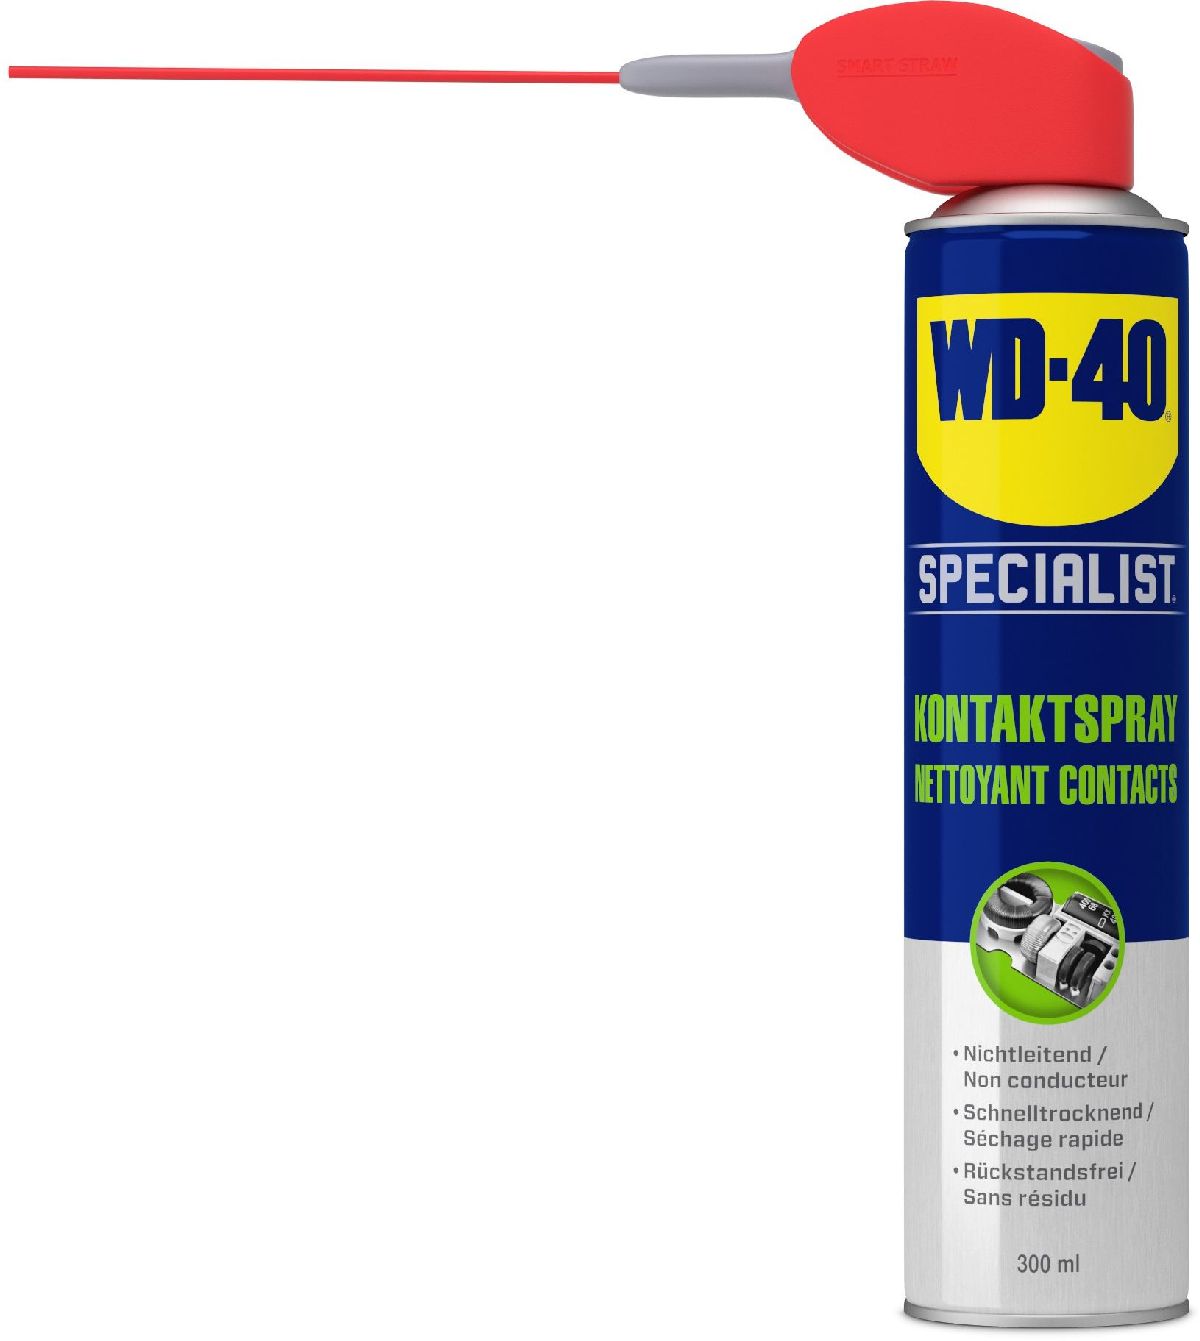 WD-40 Specialist Nettoyant Contacts Bombe arosol 300 ml